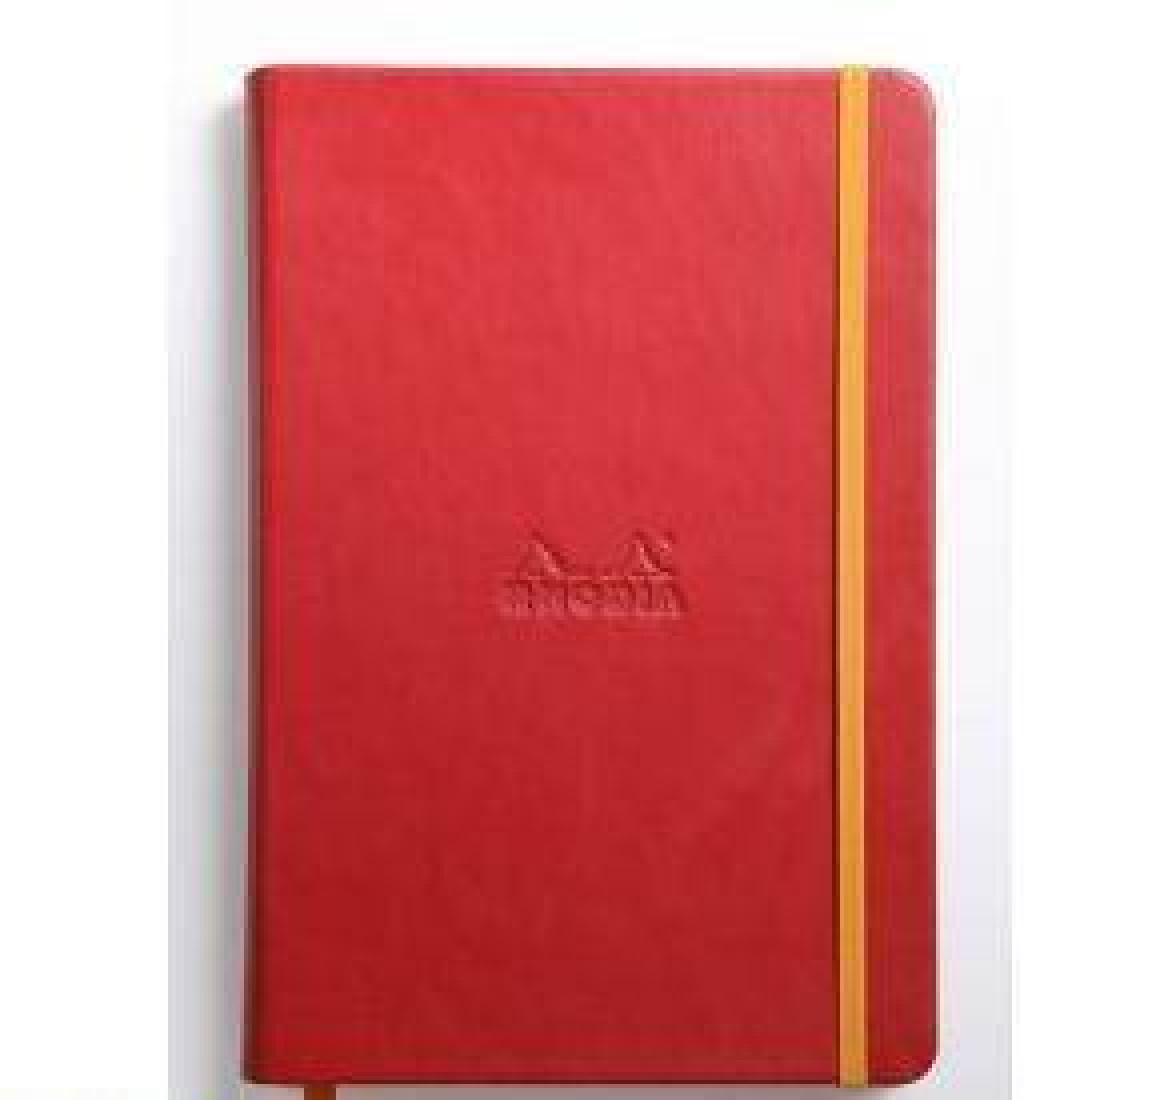 NOTEBOOK A5 RHODIARAMA RED LINED HARD COVER RHODIA